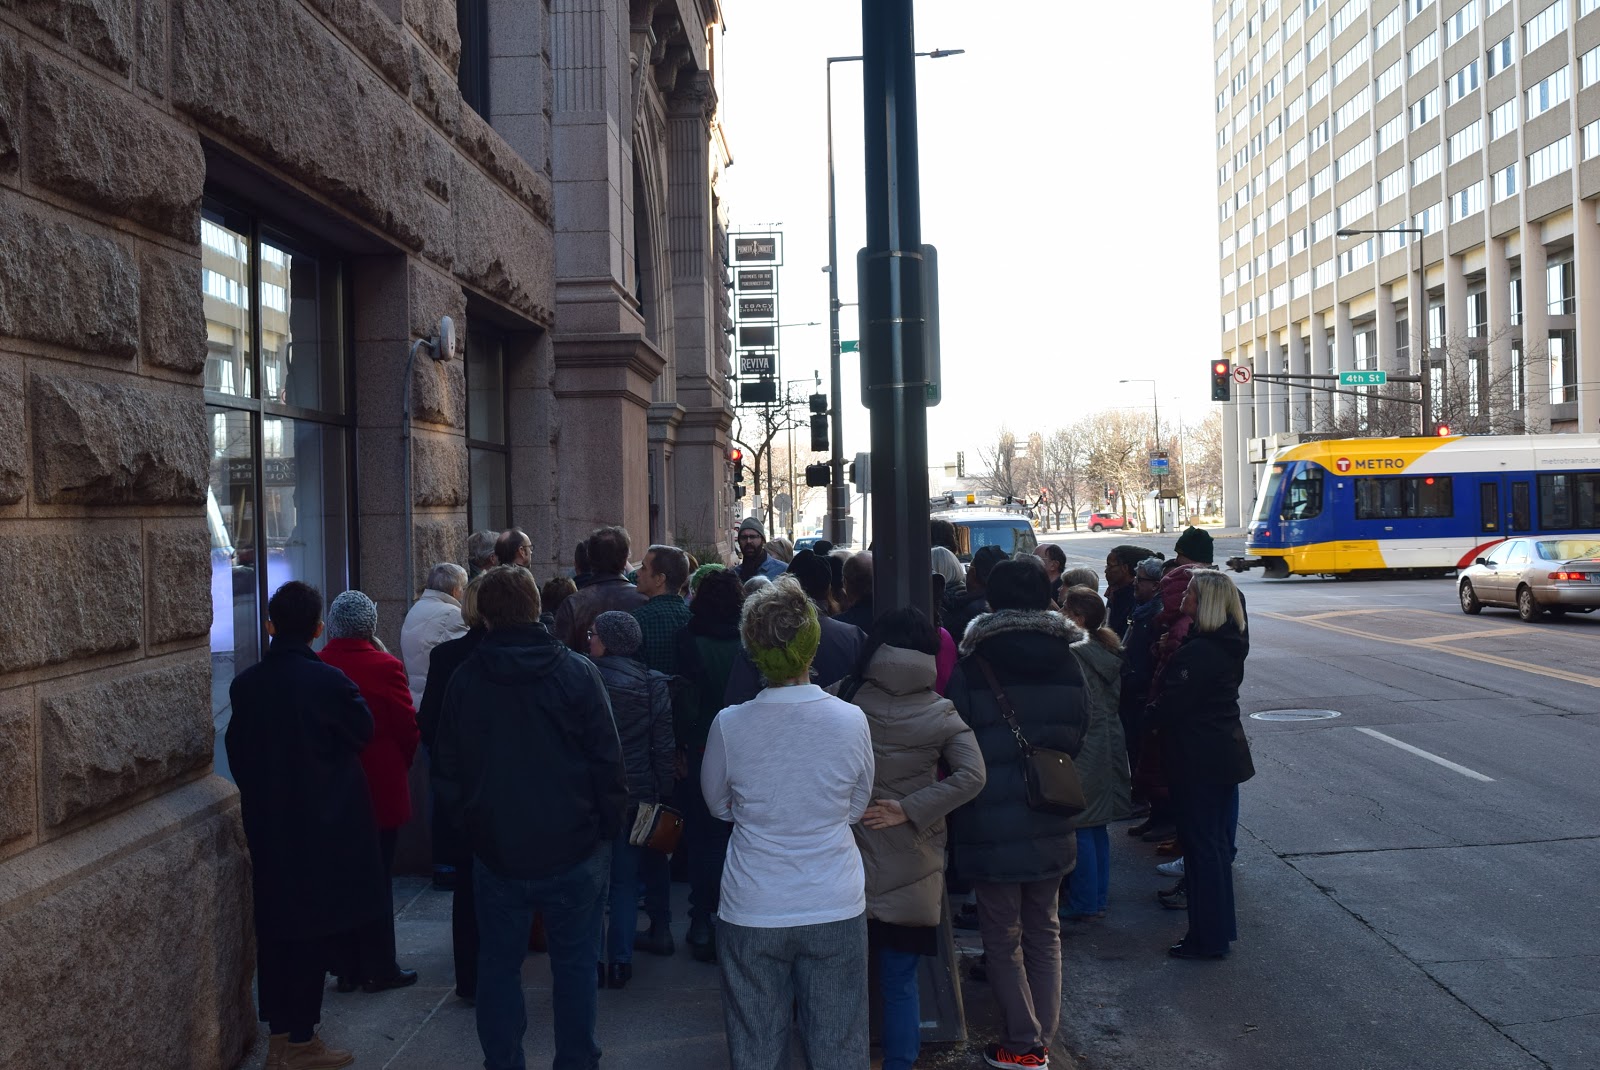 Visitors cluster around The M's Window Gallery to view David Bowen’s "Waveline." The museum’s new space in the Pioneer Endicott building in downtown St. Paul is located one block from Central Station of the Green Line light rail.